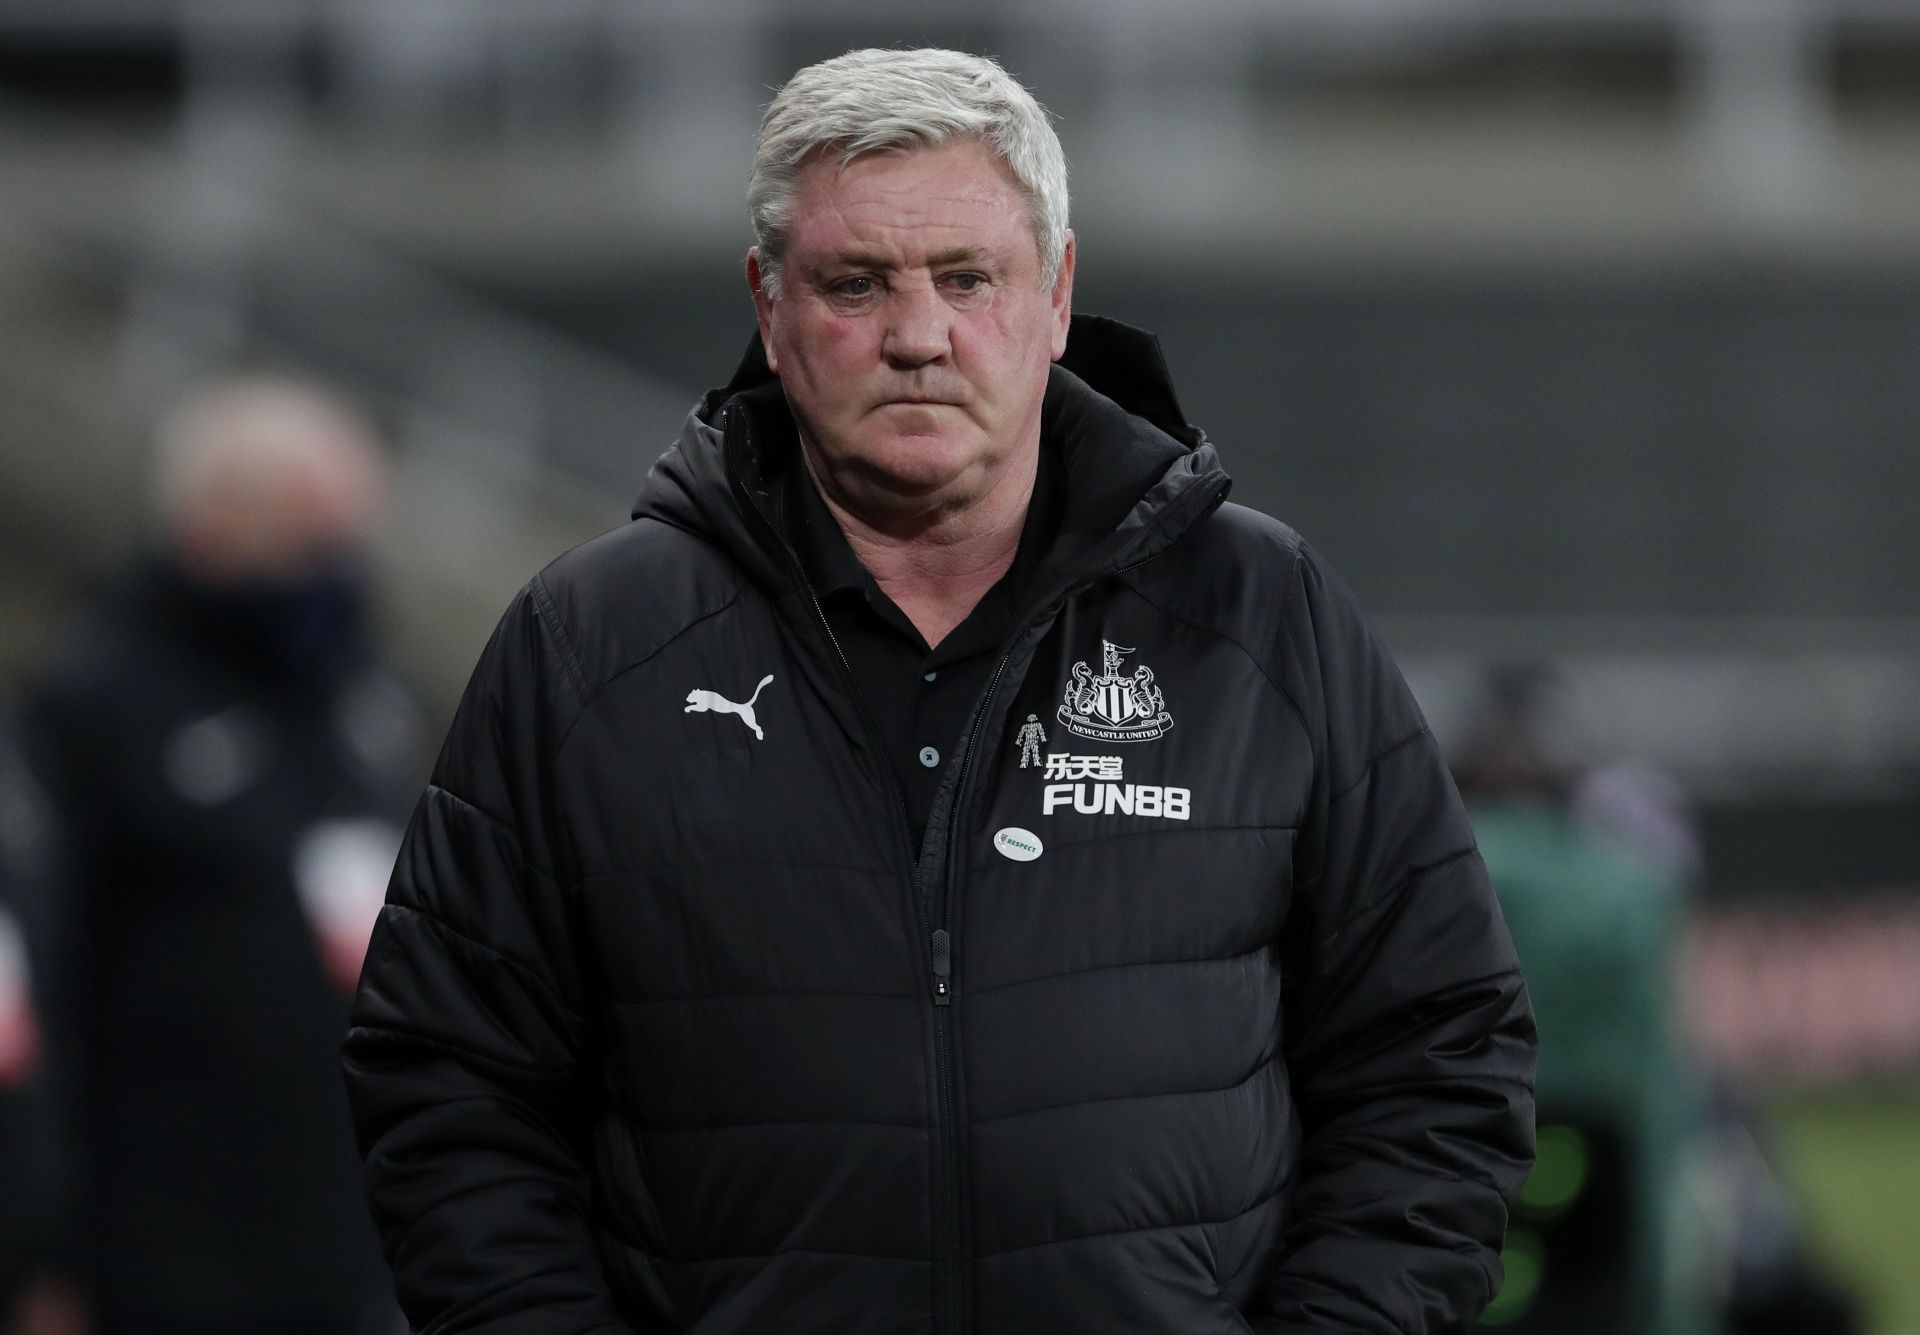 Steve Bruce has been sacked by Newcastle United.